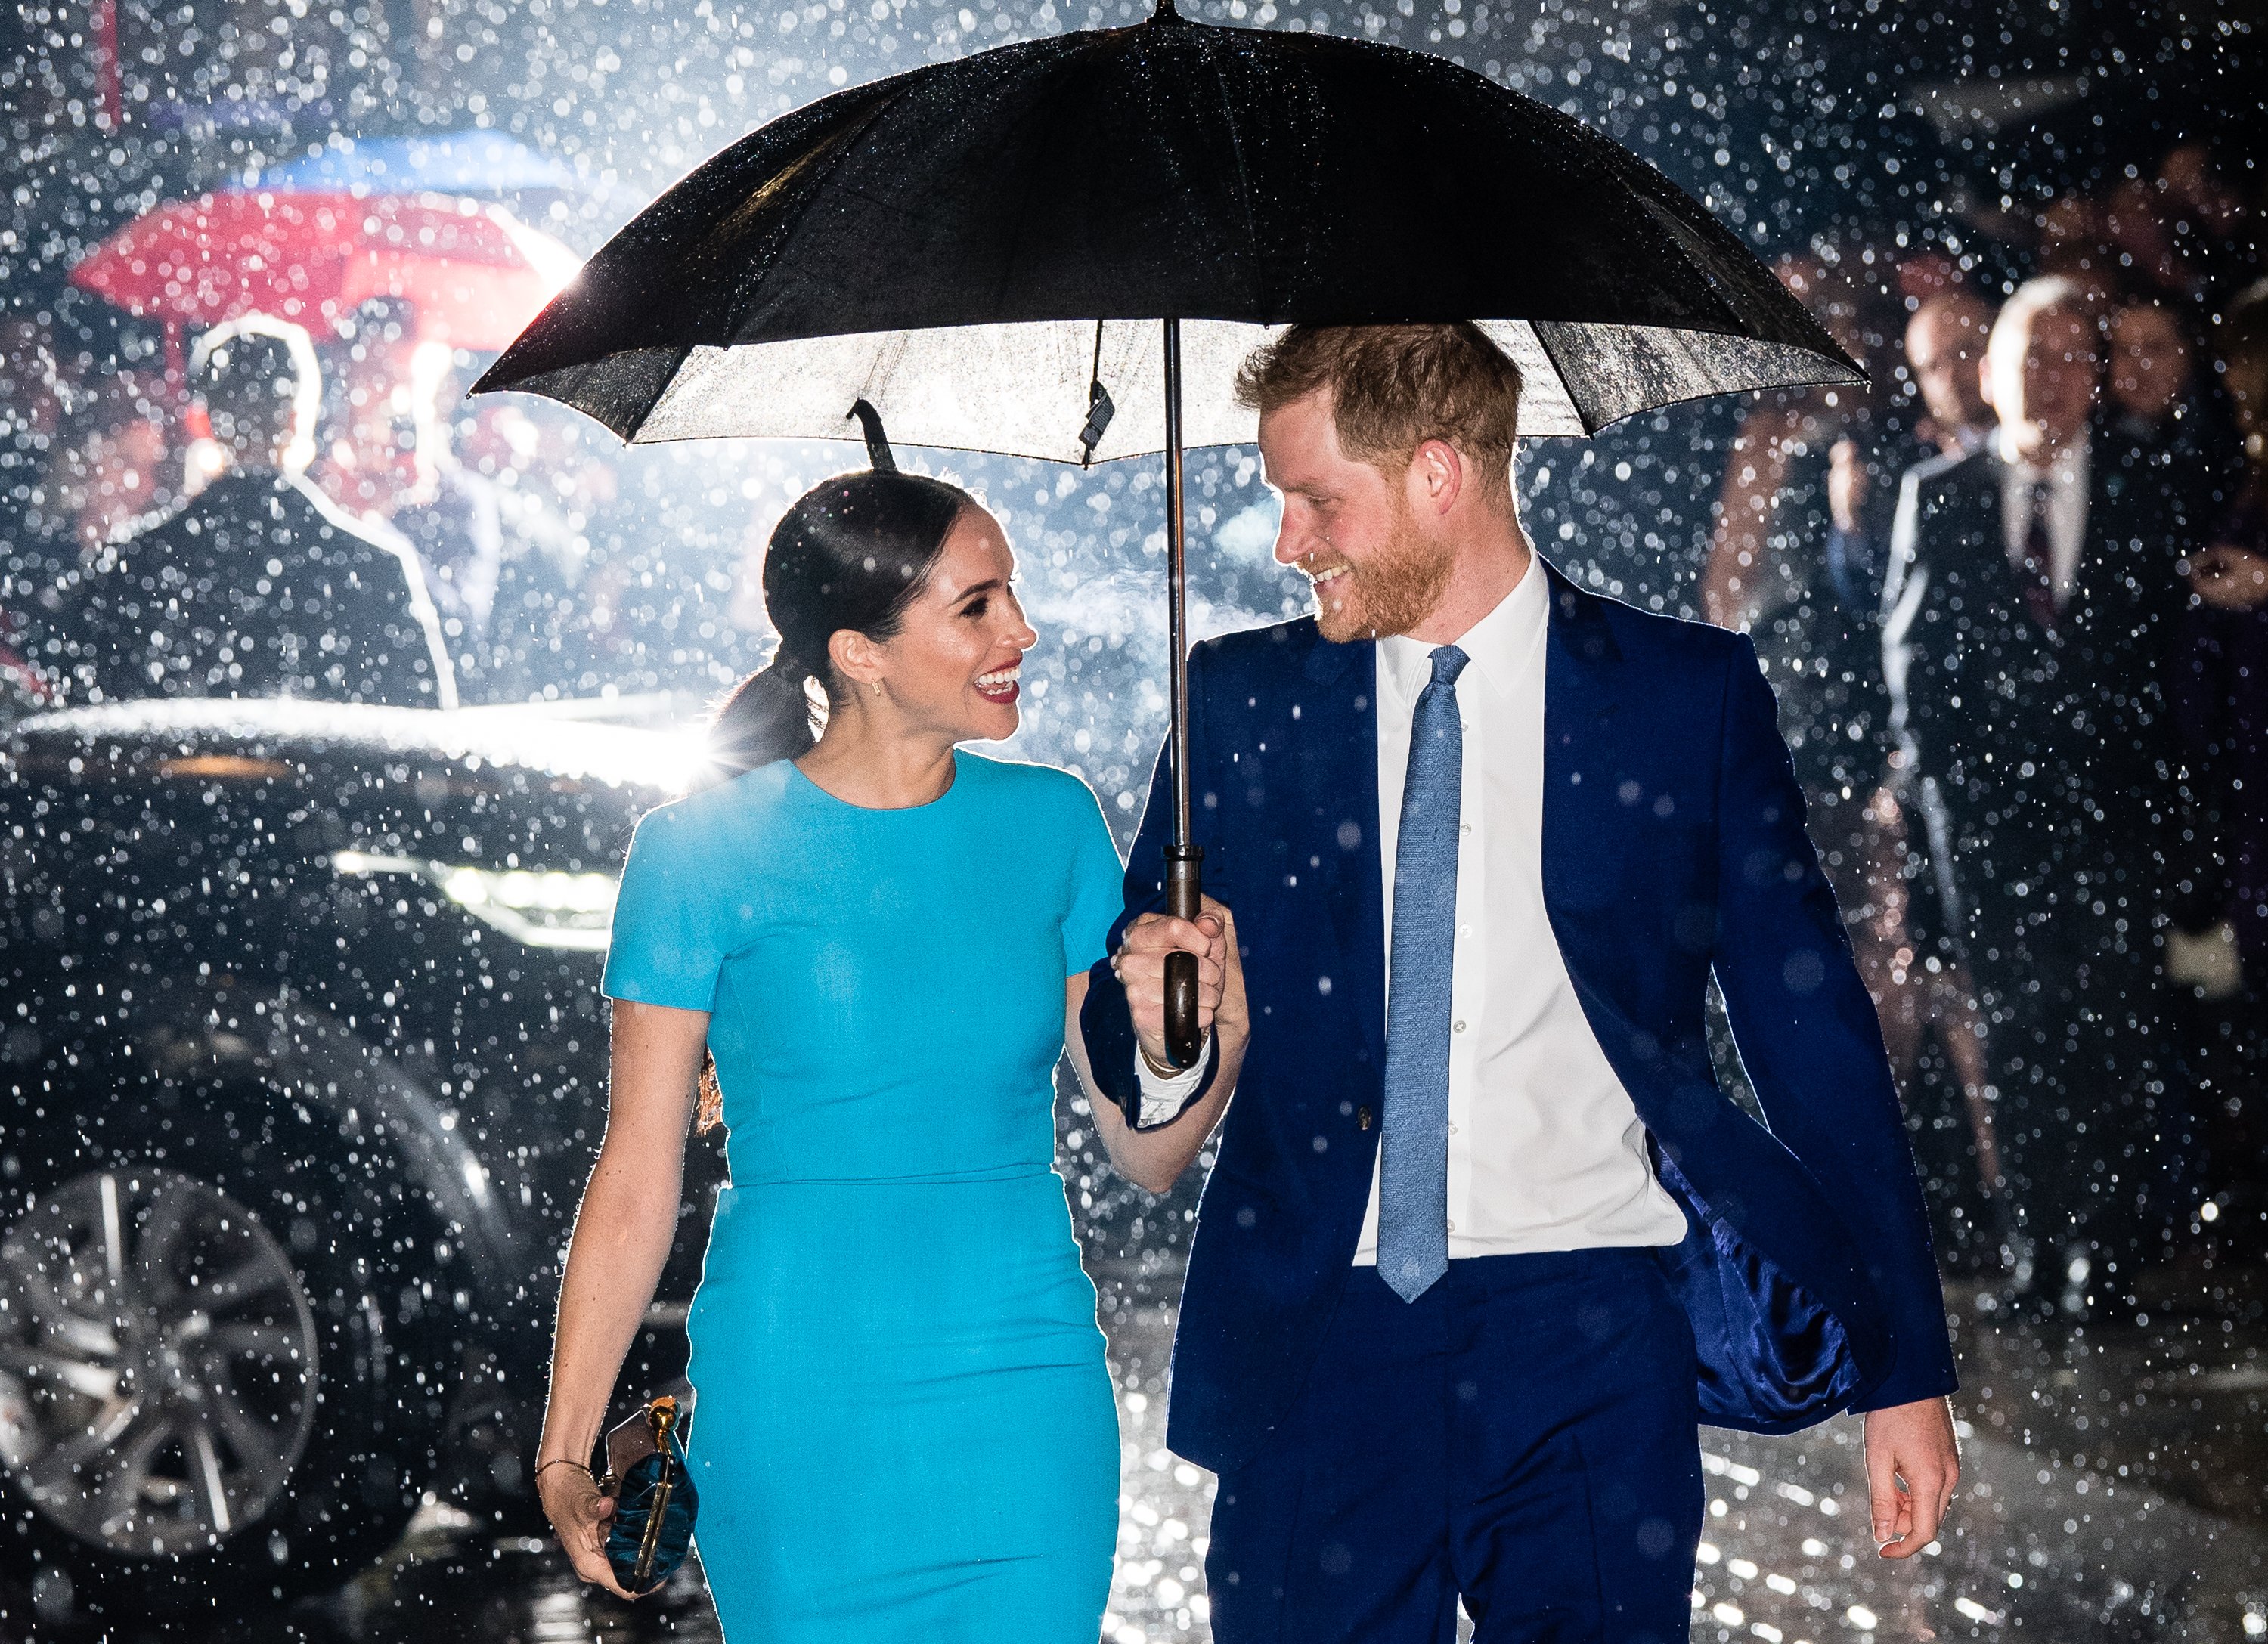 Prince Harry and Meghan Markle attend The Endeavour Fund Awards on March 05, 2020, in London, England. | Source: Getty Images.